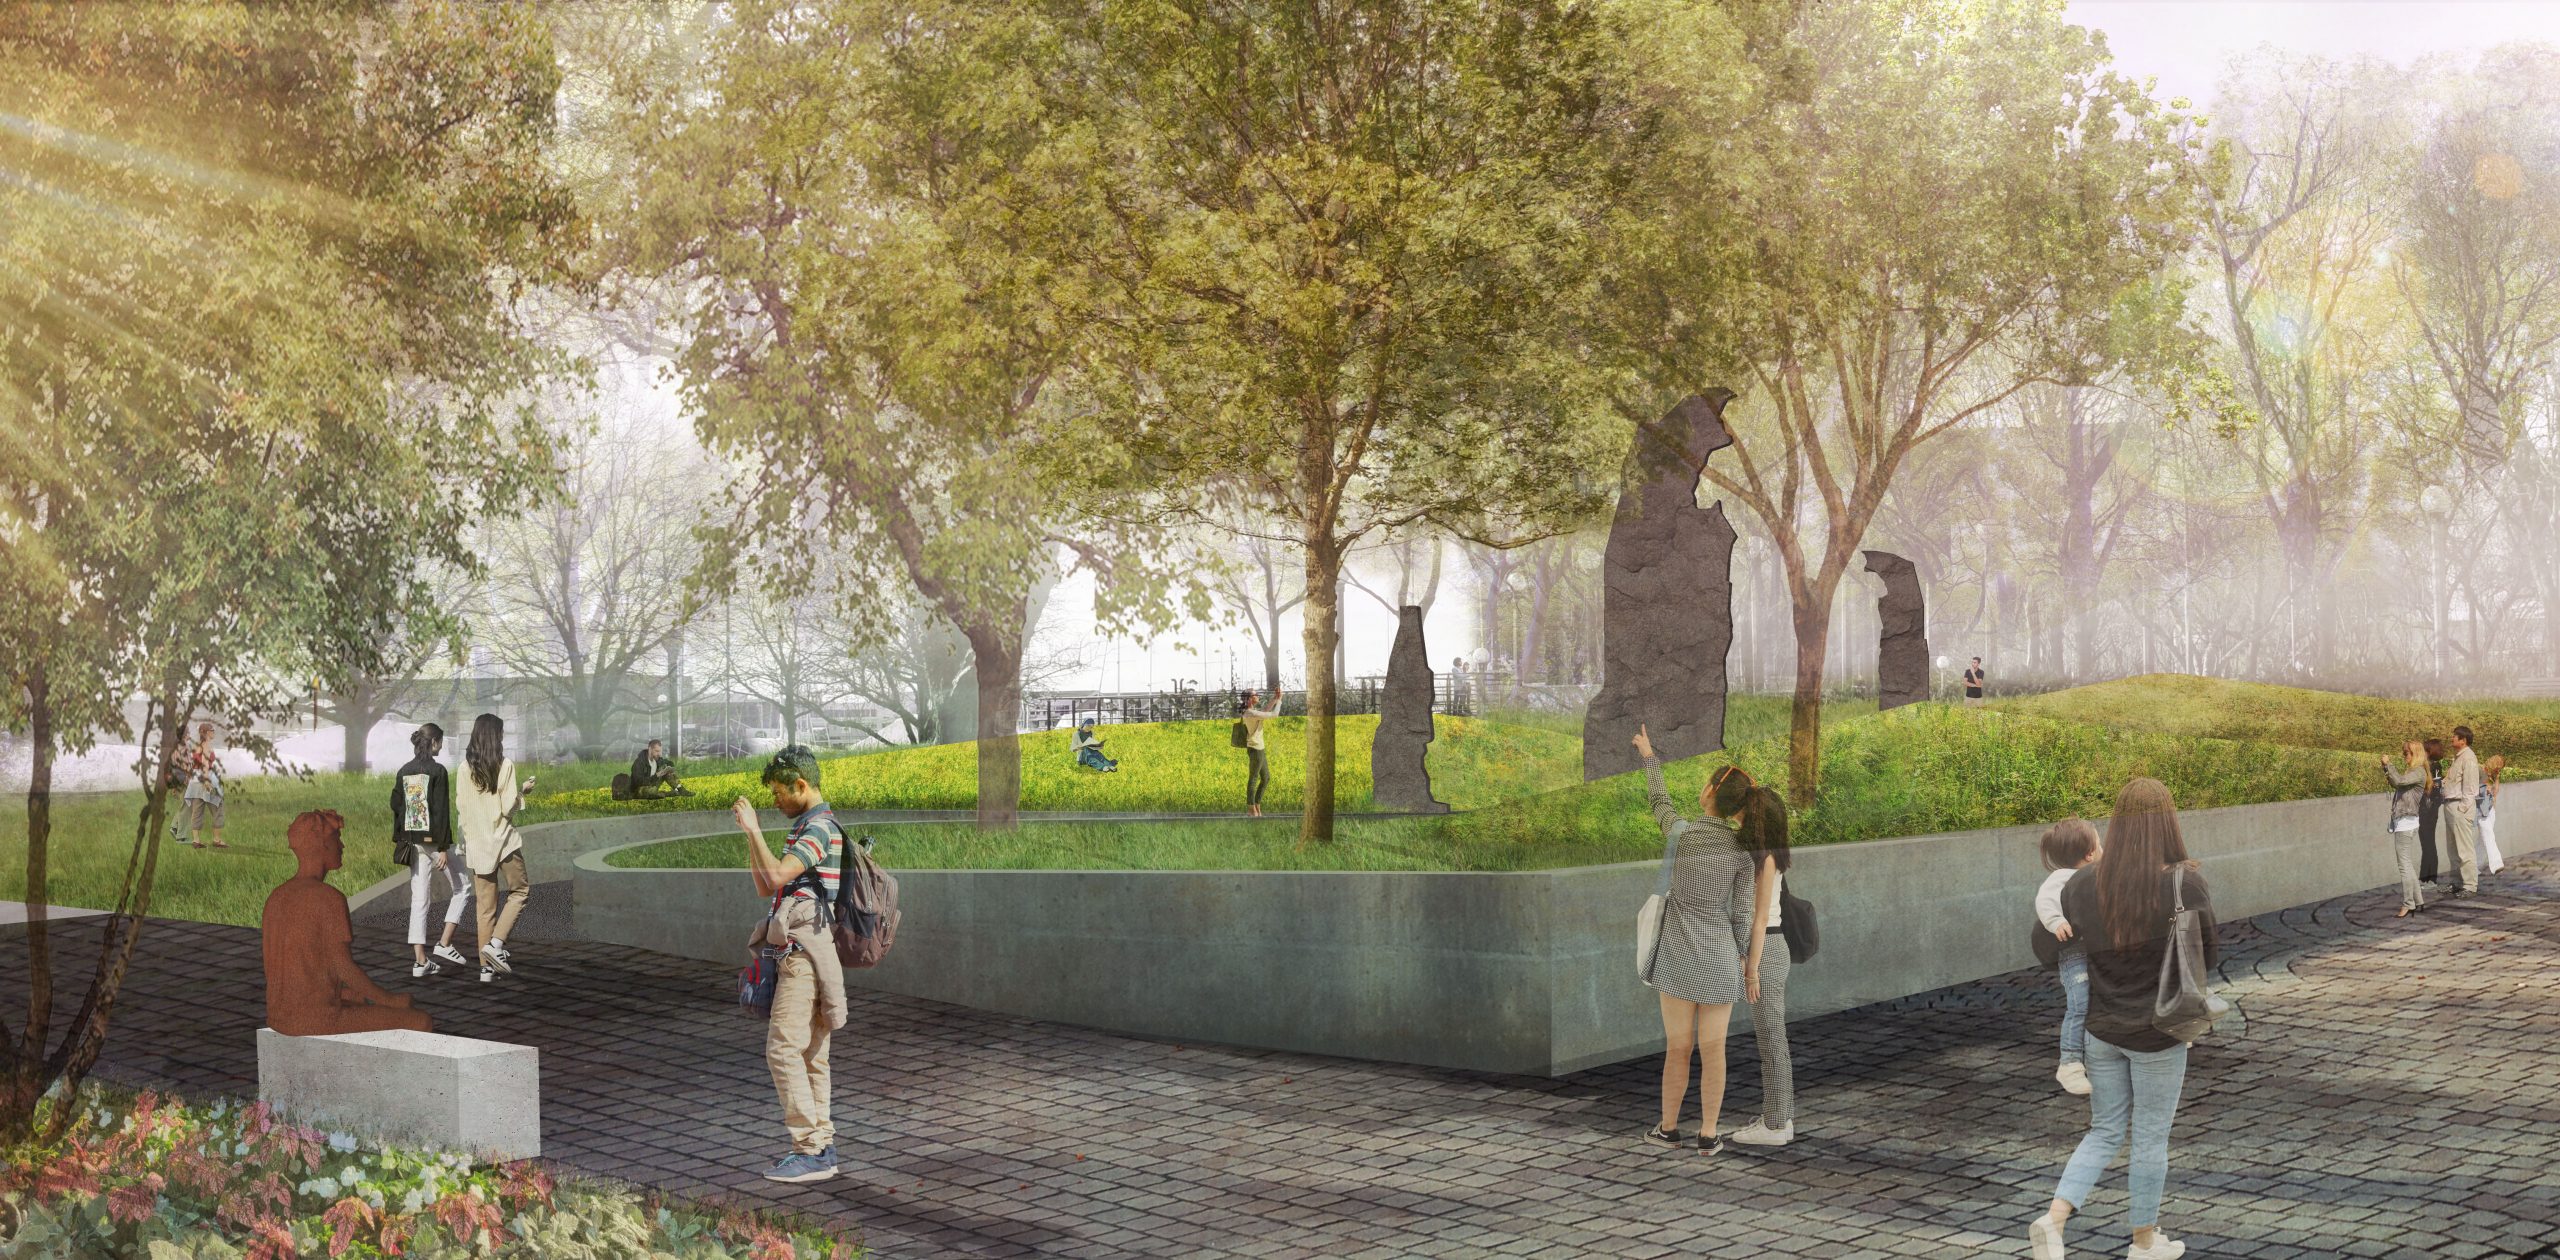 An artist rendering of the Terry Fox legacy art installation proposed for Toronto Music Garden which shows pathways, trees and landscaping with large sculpted granite stone slabs in irregular shapes which form an outline of Terry Fox when viewed from a certain angle in the park.